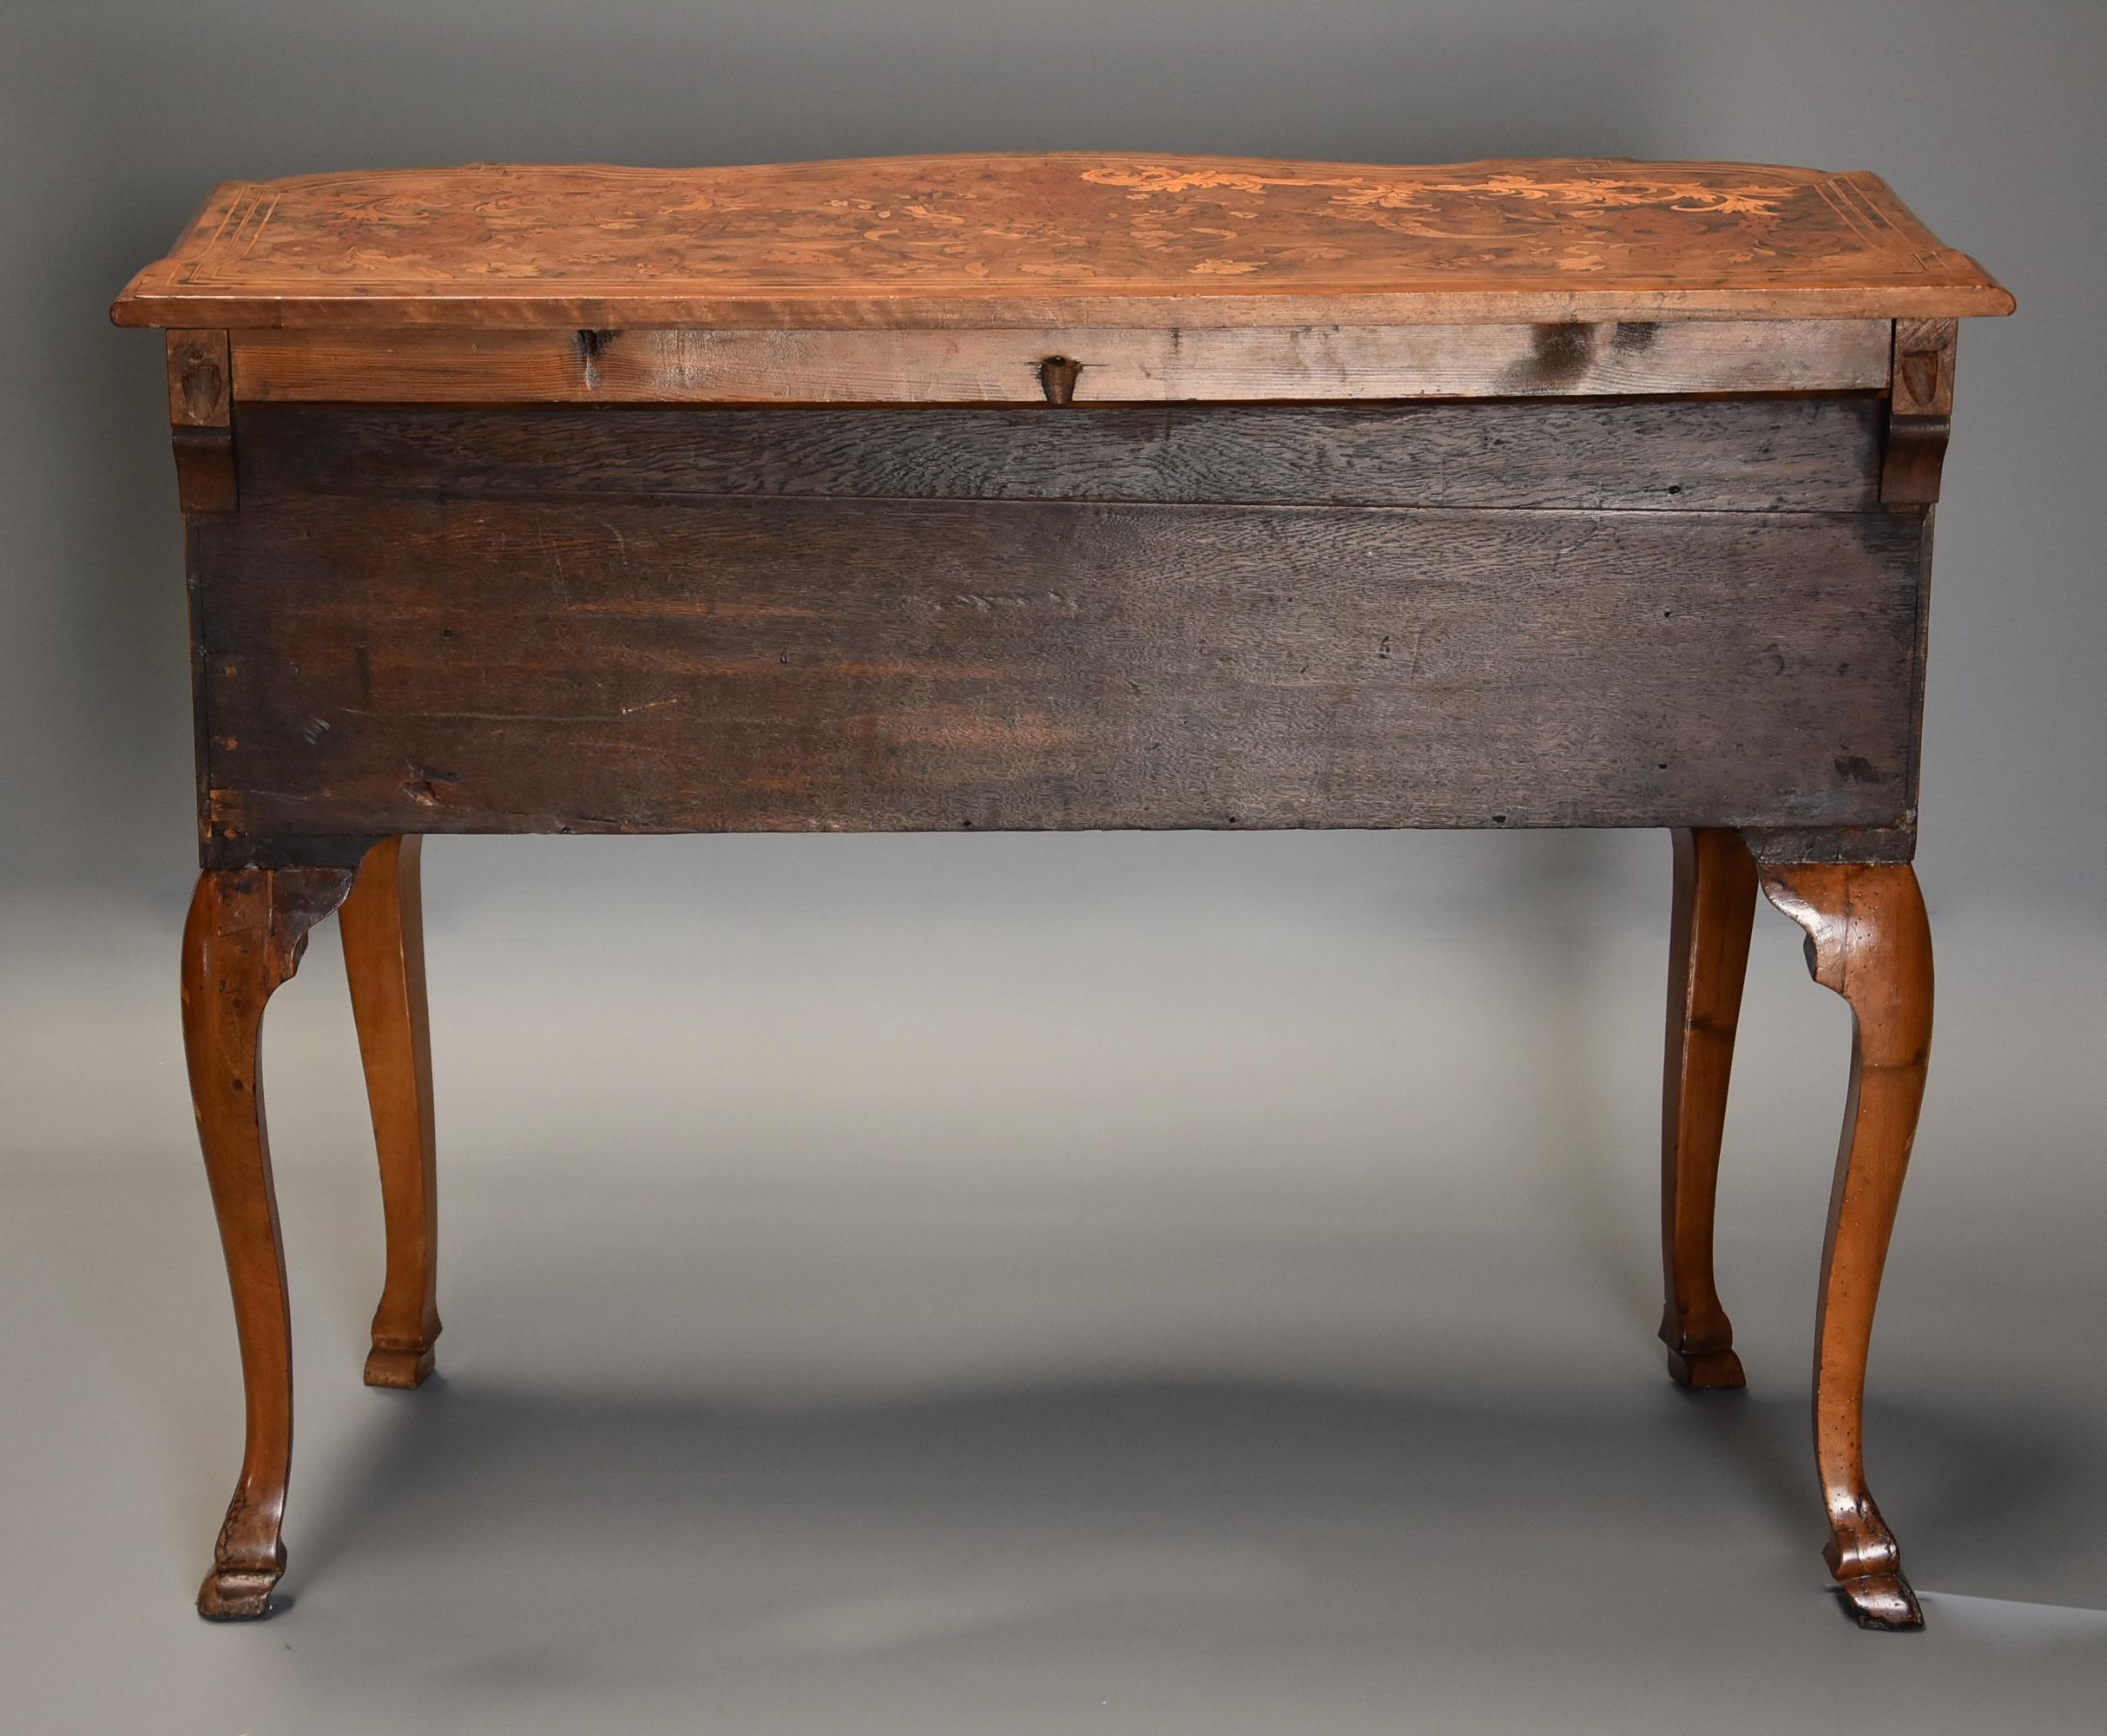 Fine Quality Mid-19th Century Floral Marquetry Walnut Lowboy of Serpentine Form For Sale 11